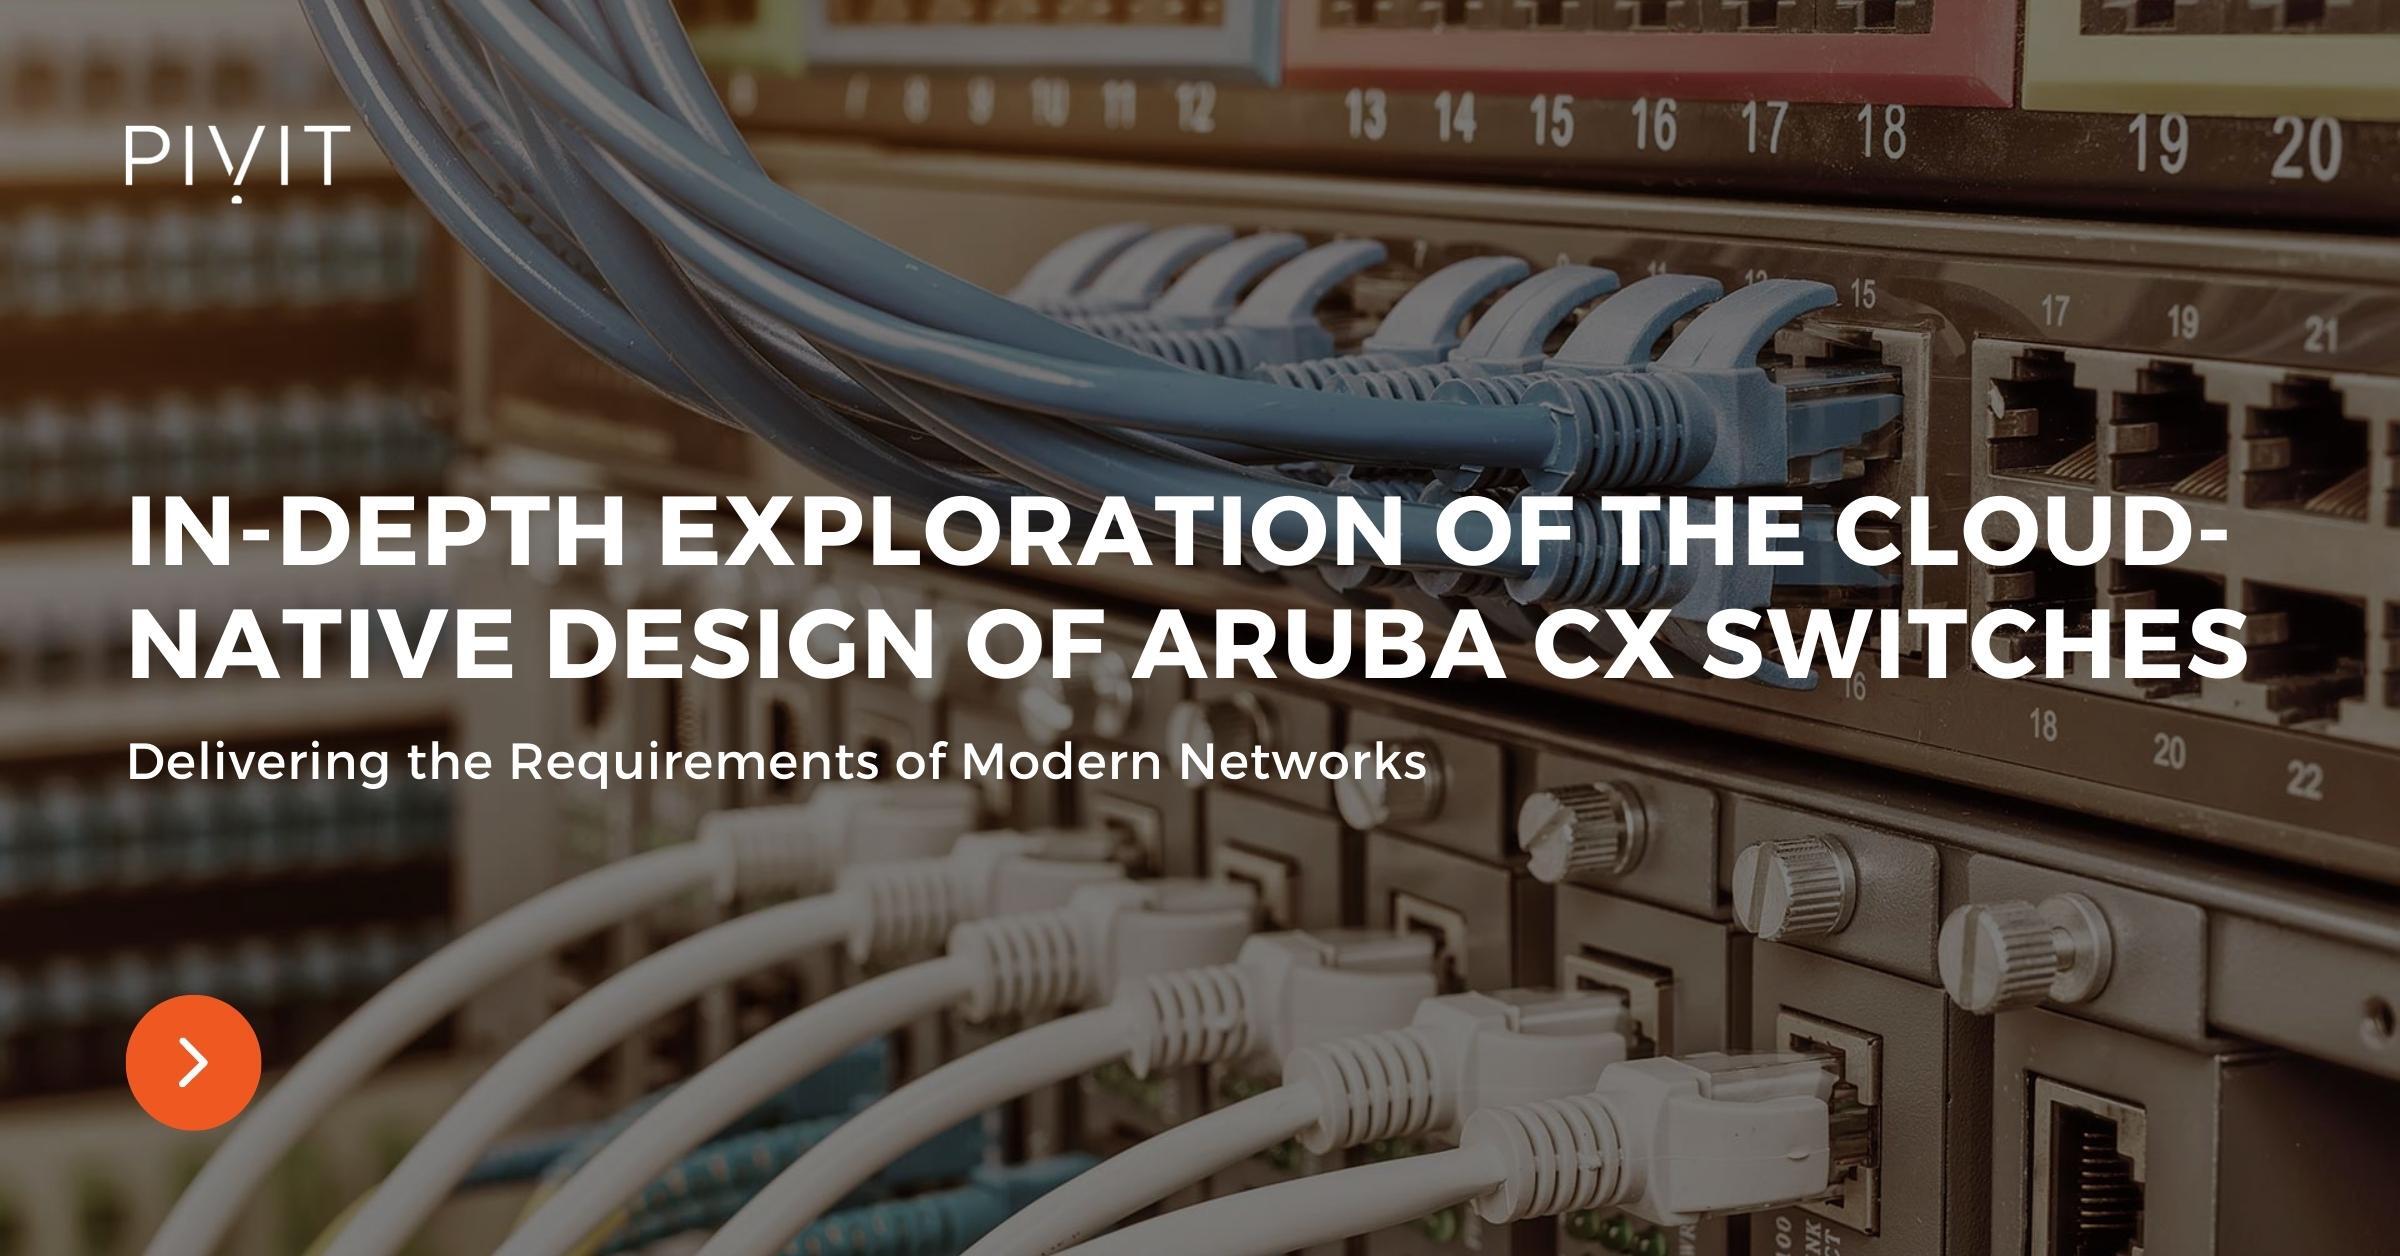 In-Depth Exploration of the Cloud-Native Design of Aruba CX Switches - Delivering the Requirements of Modern Networks